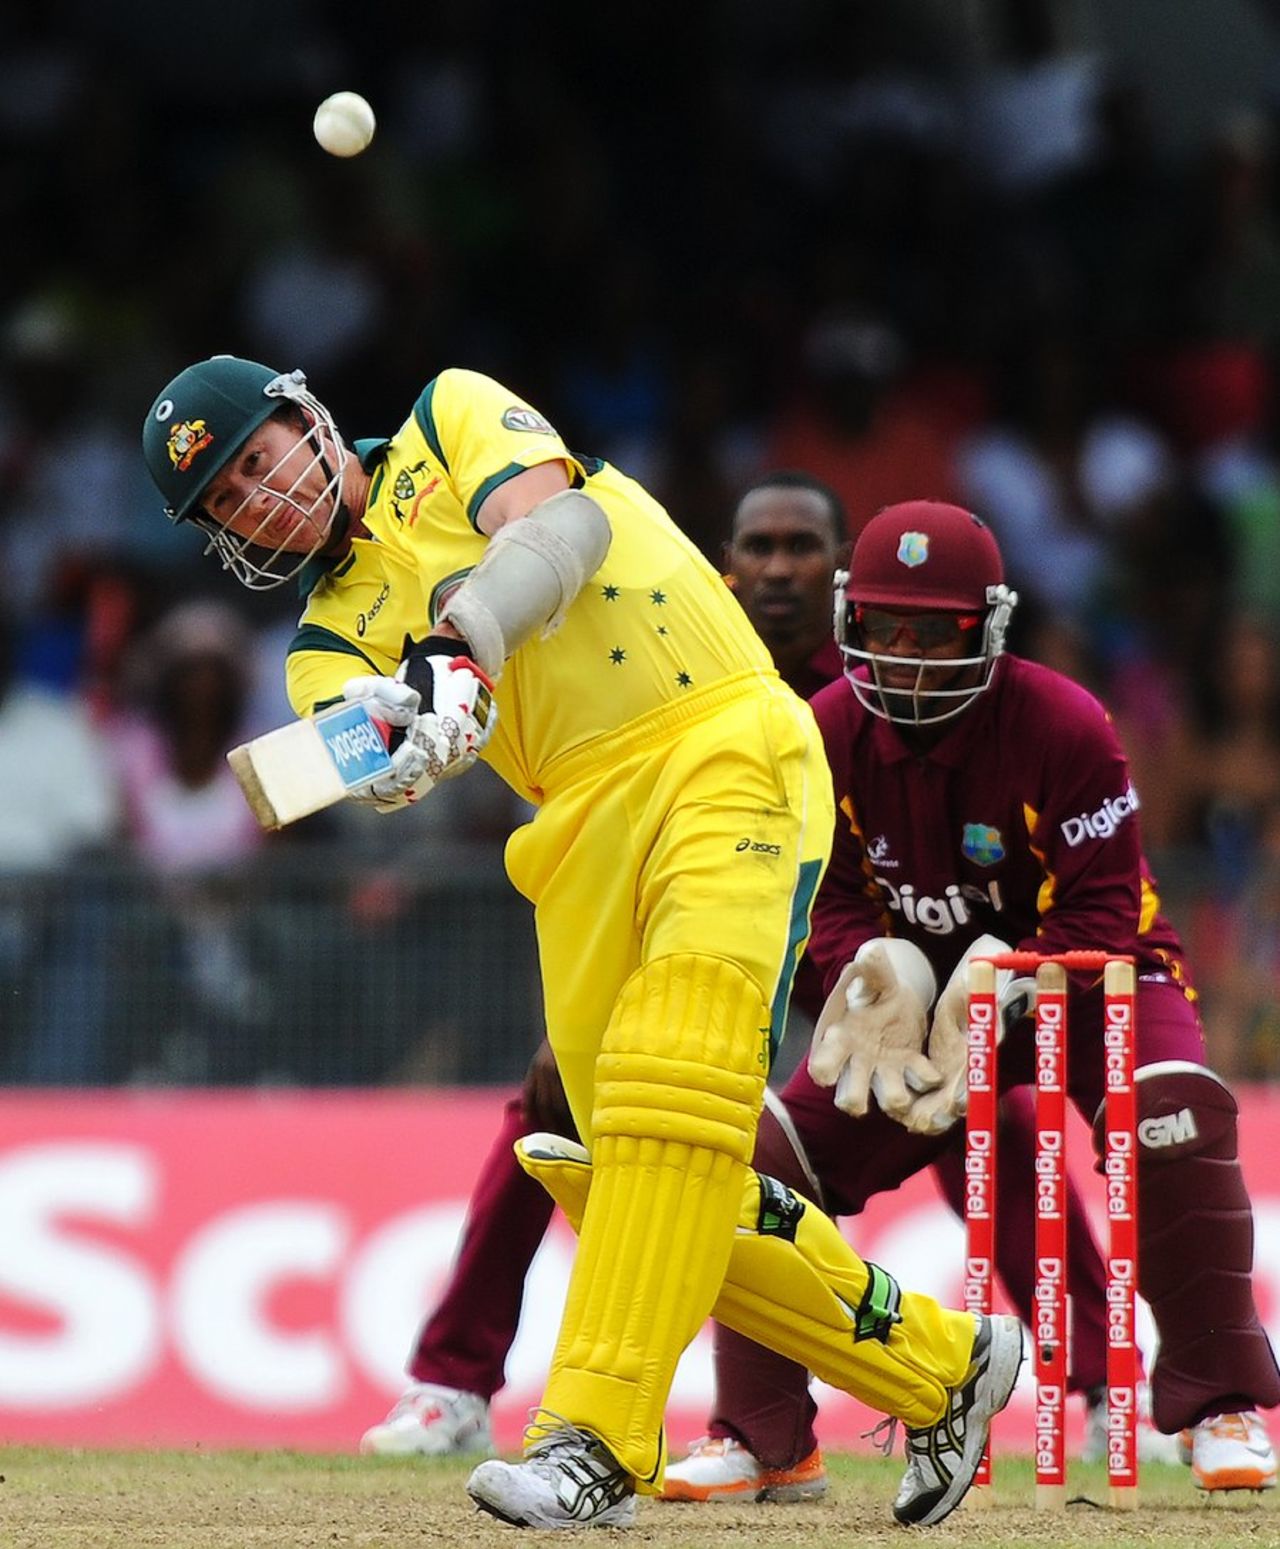 Brett Lee launches Sunil Narine for six, West Indies v Australia, 2nd ODI, St Vincent, March 18, 2012